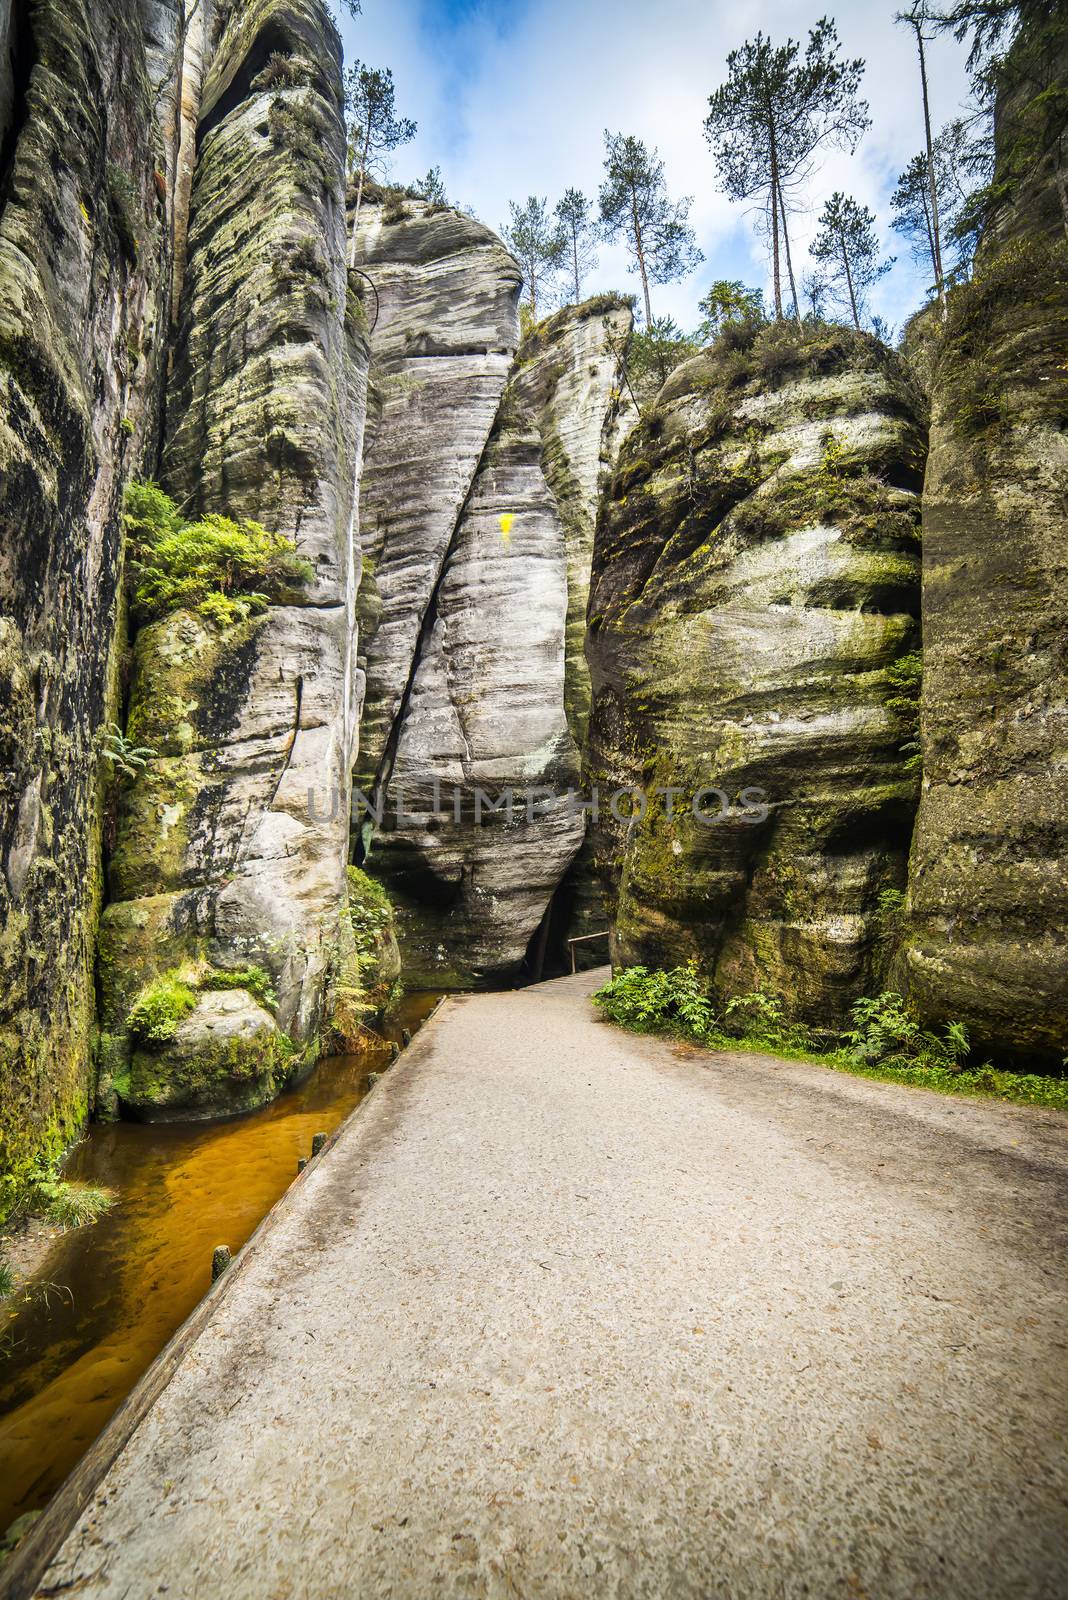 Path in Adrspach - Teplice Rocks